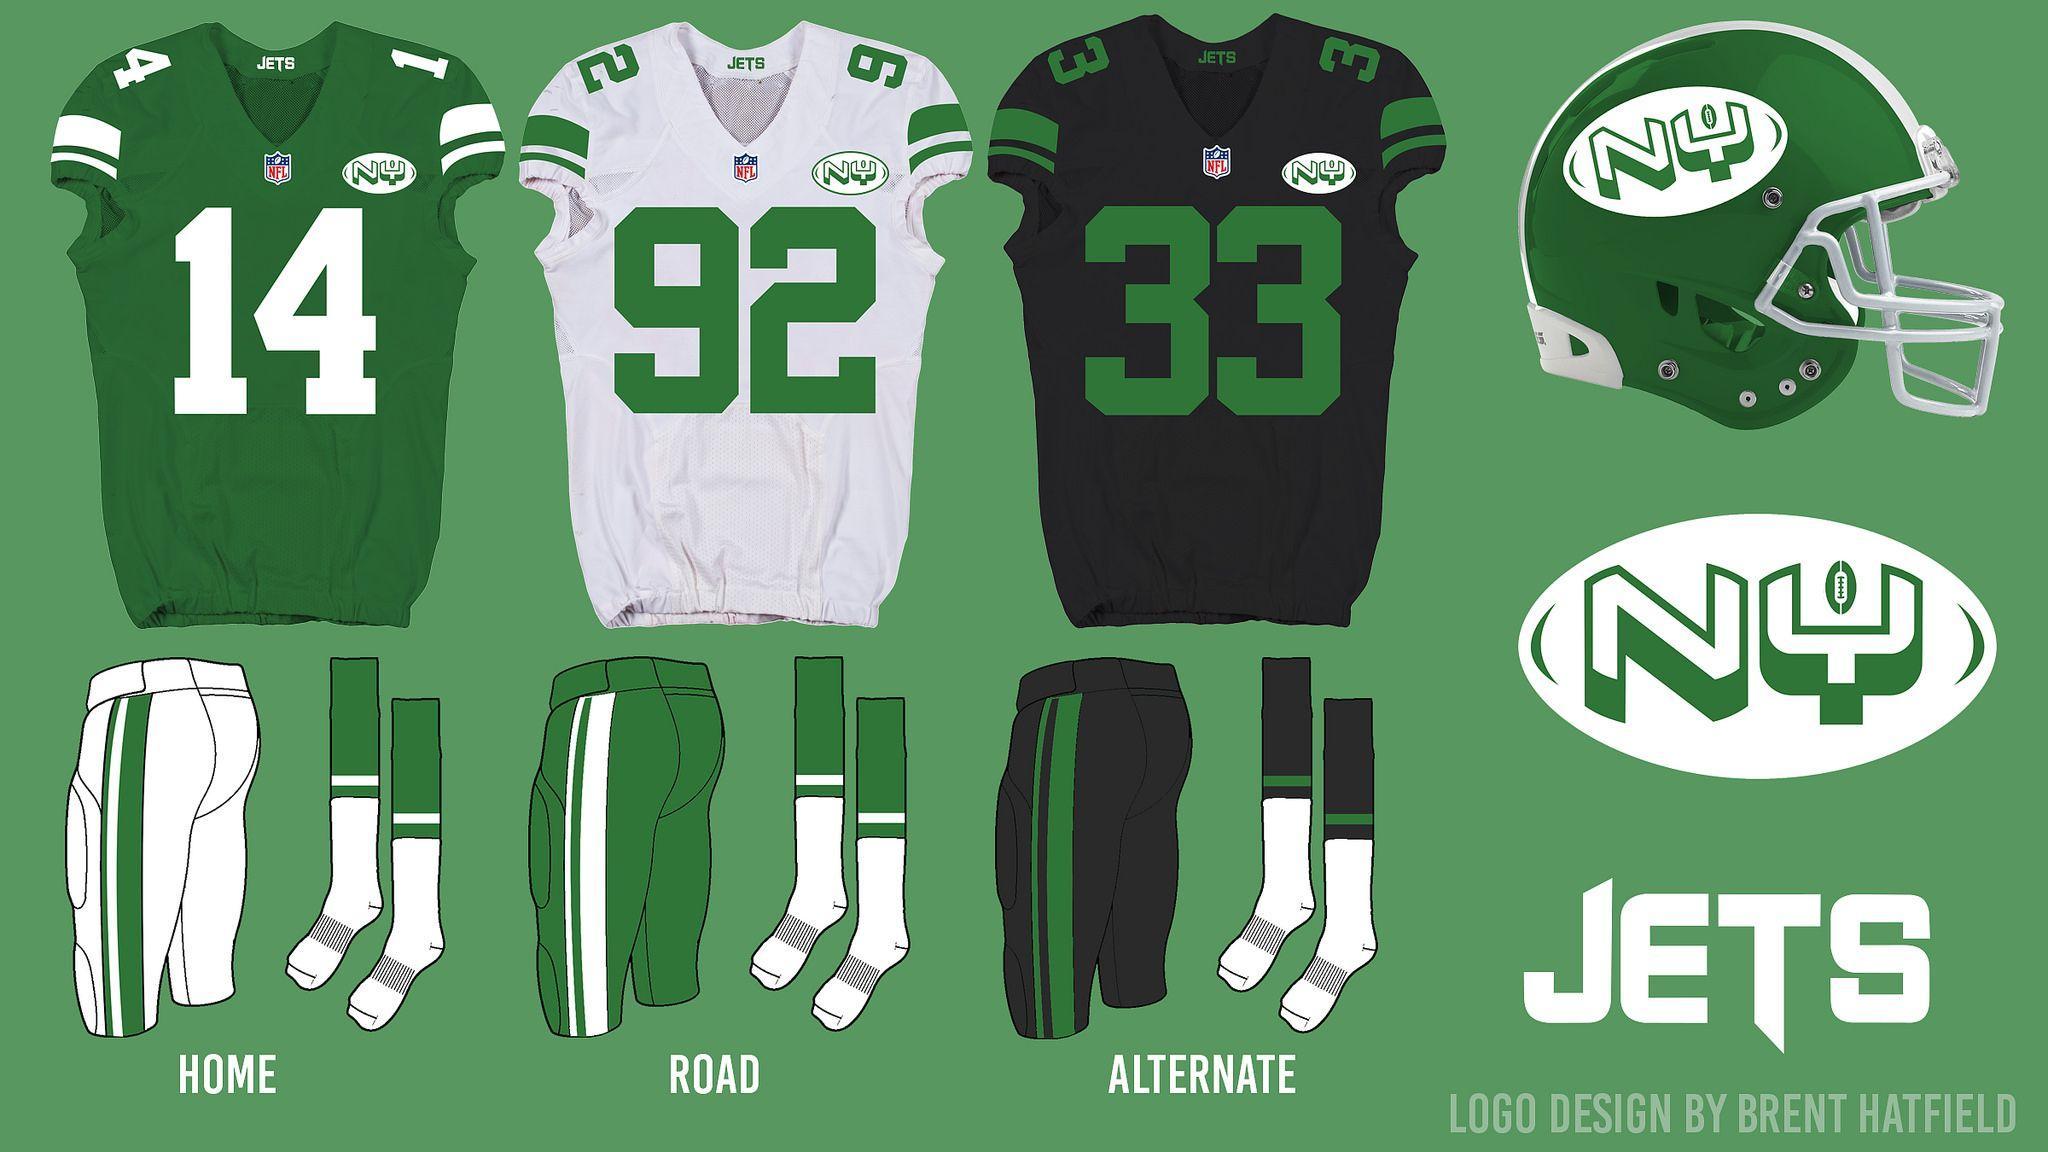 NY Jets Logo - Uni Watch delivers the winning entries for the New York Jets ...